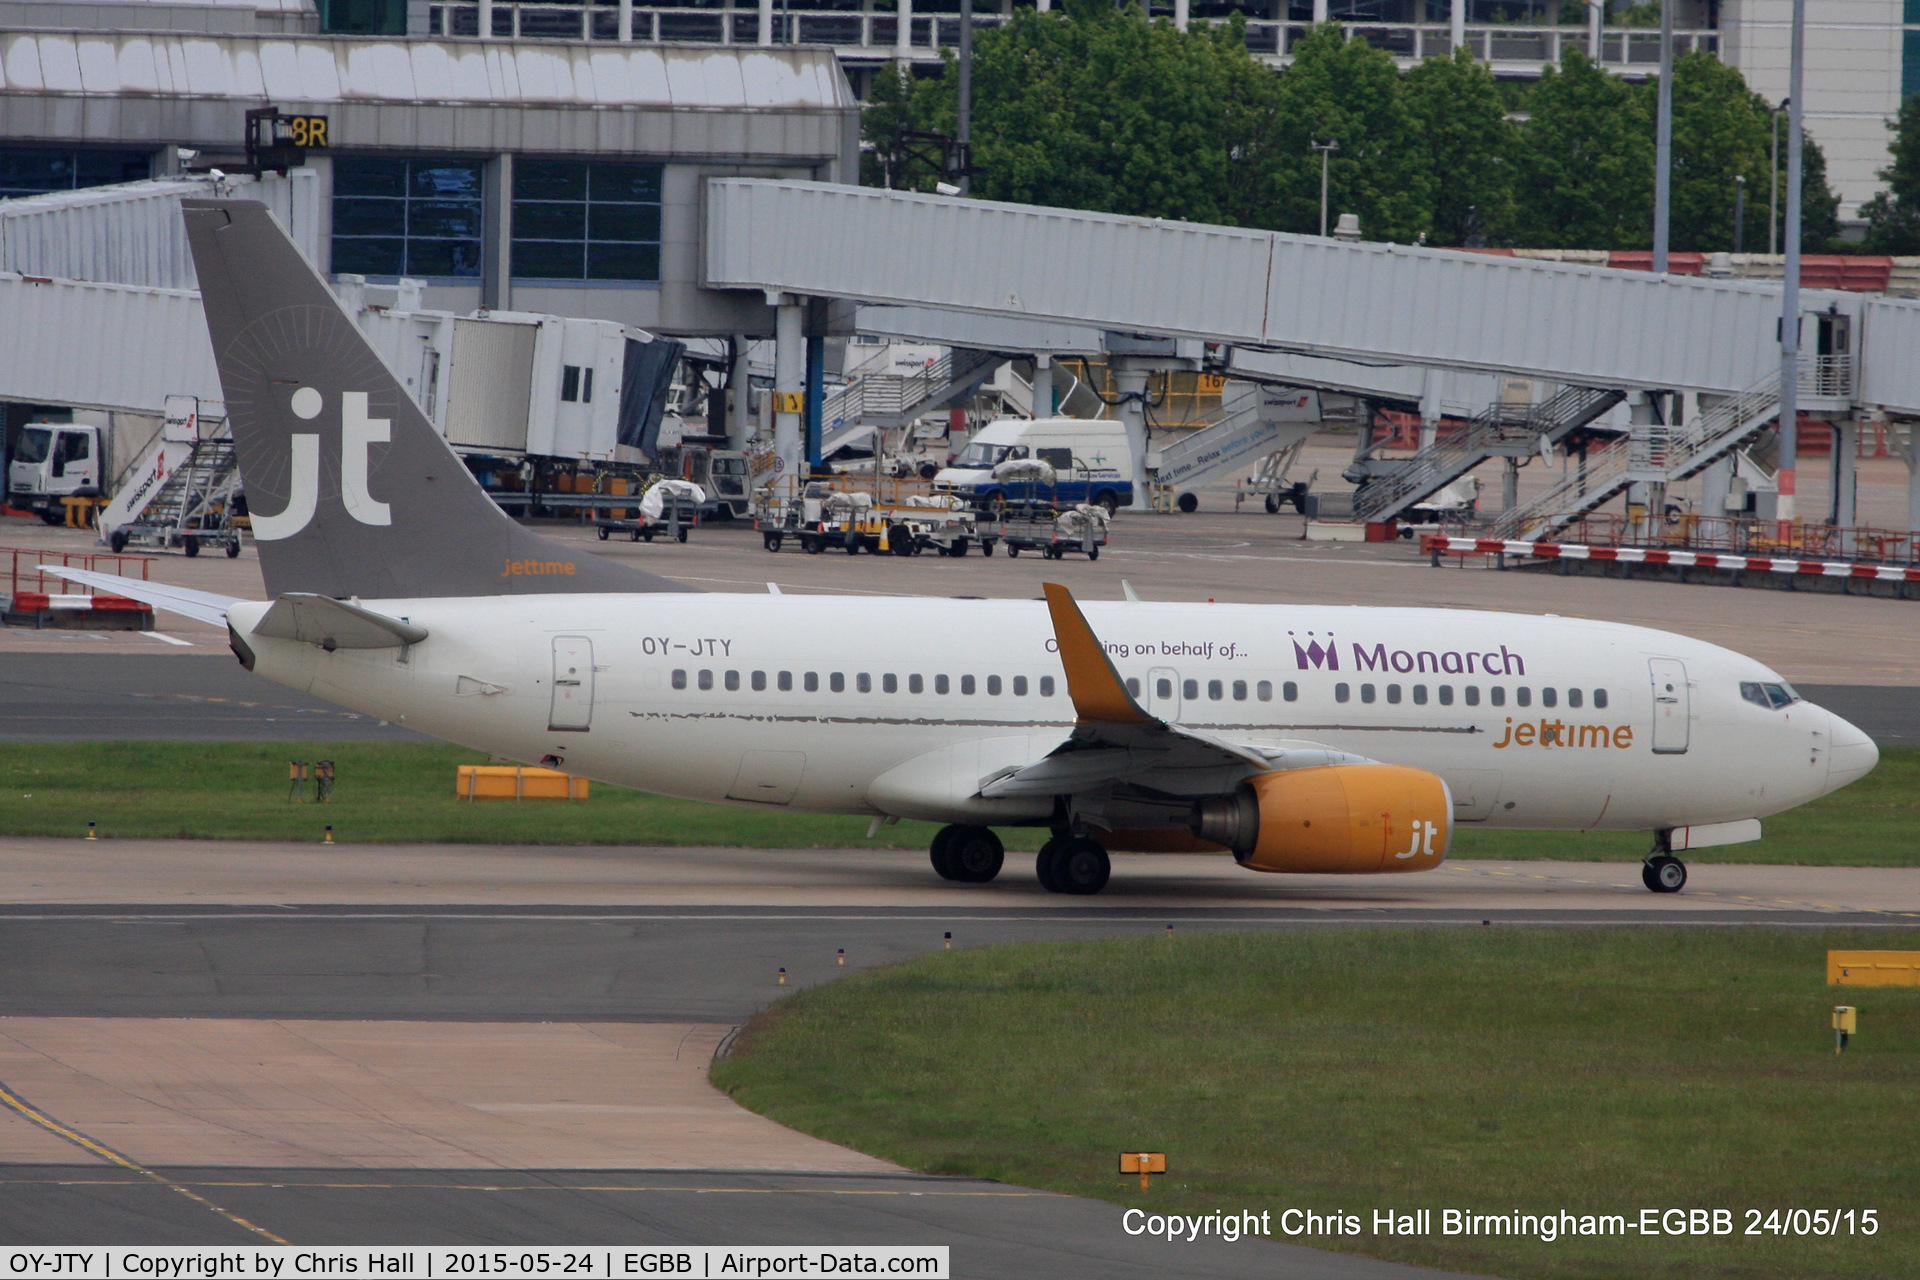 OY-JTY, 2001 Boeing 737-7Q8 C/N 30727, Jettime operating for Monarch